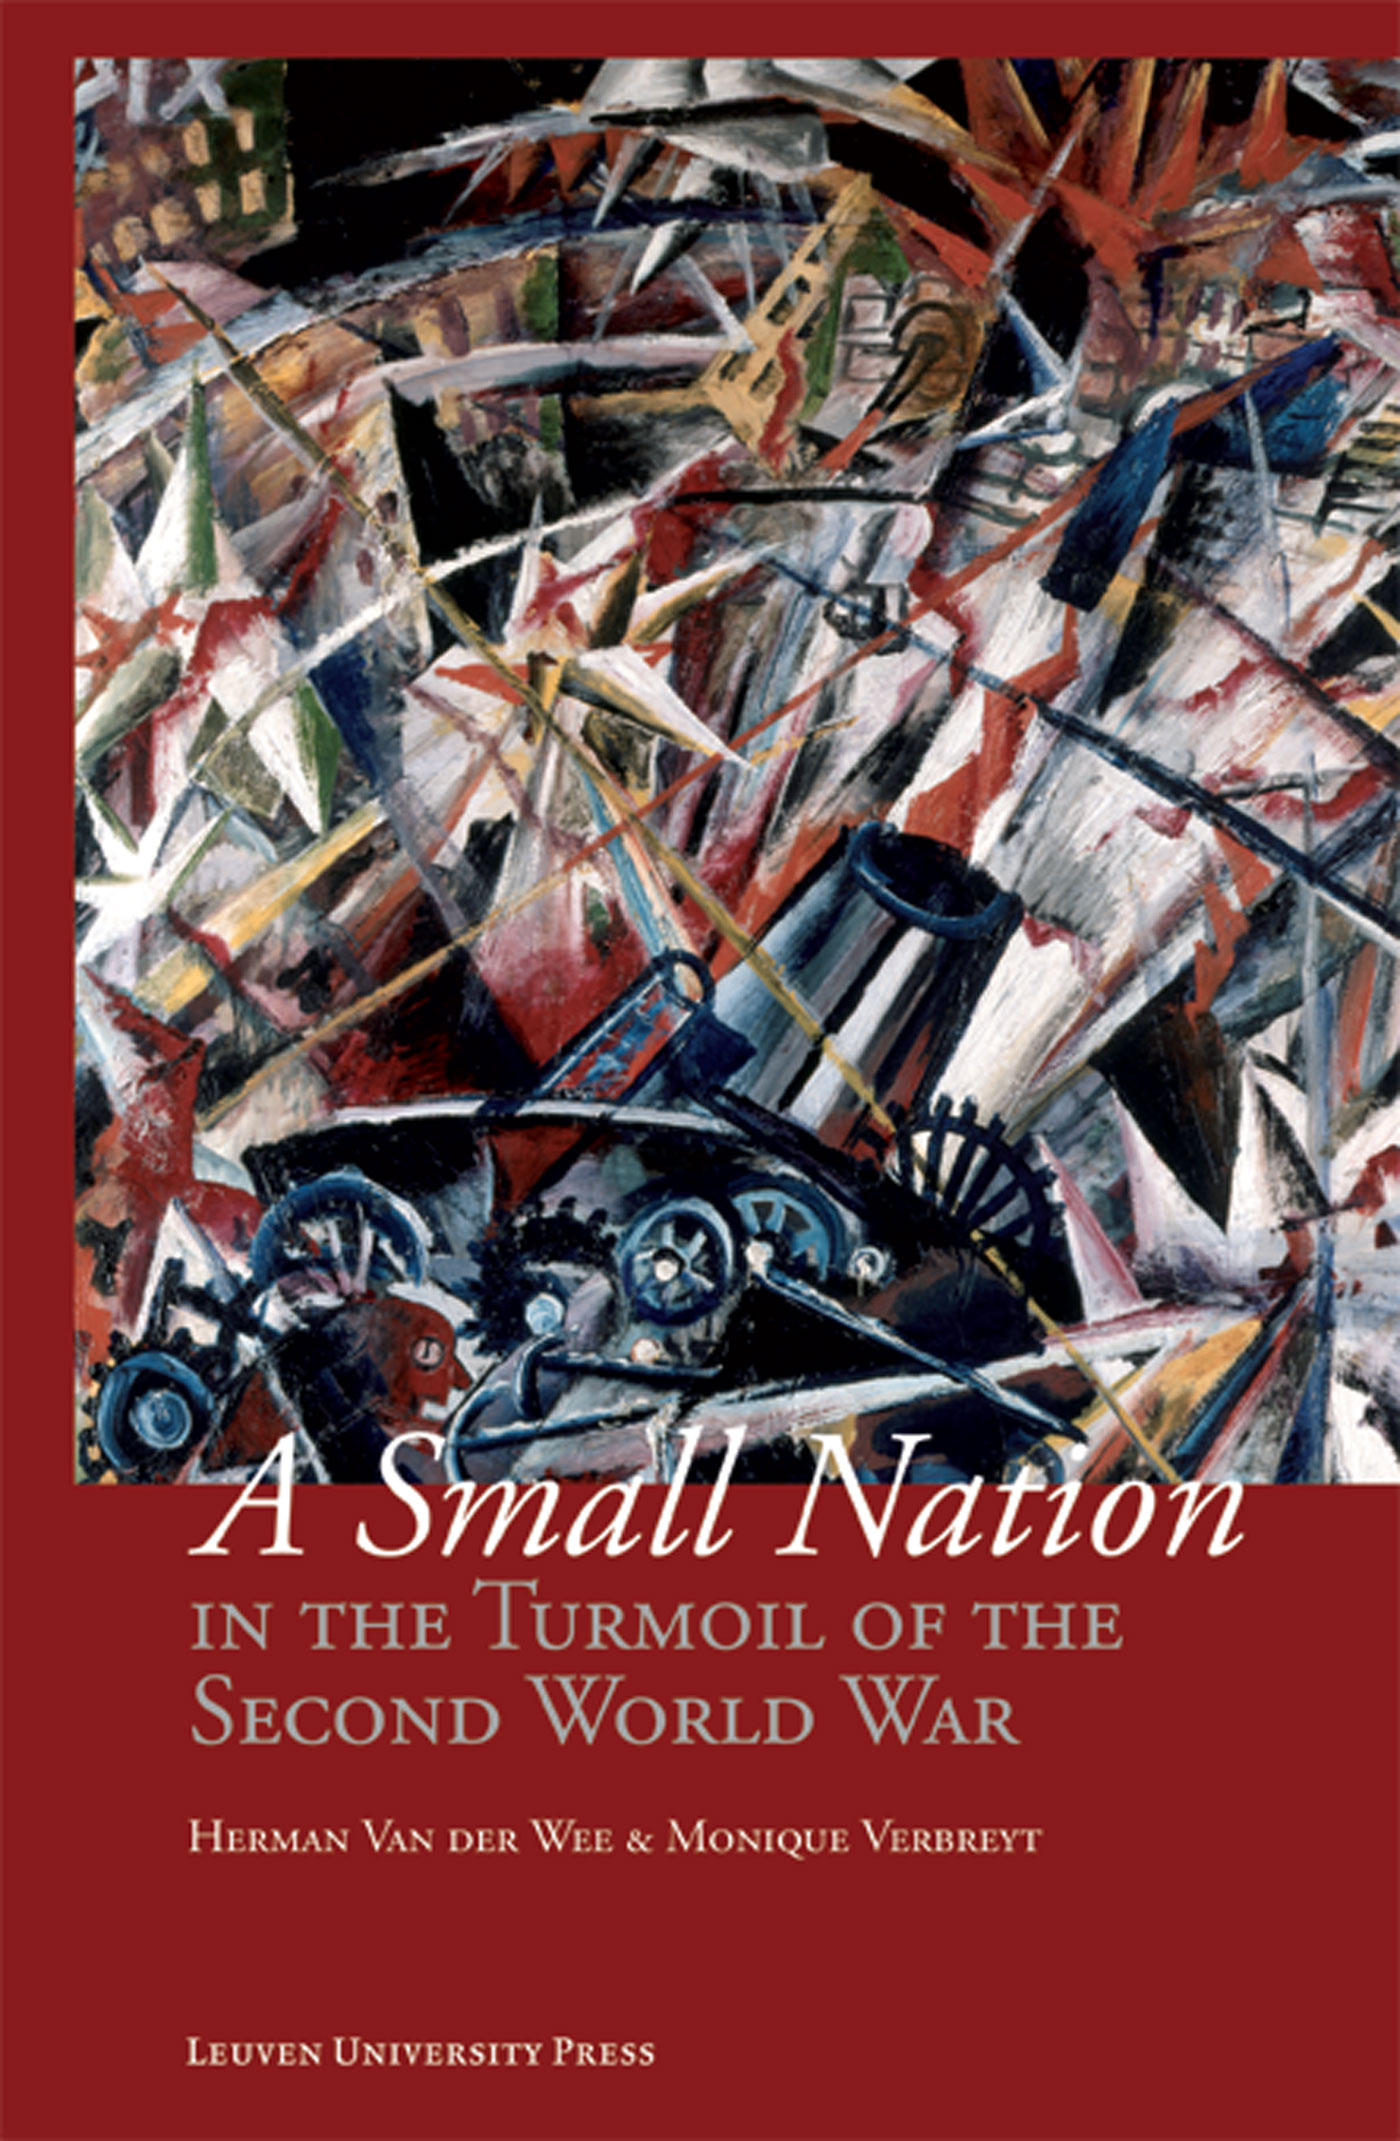 A small nation in the turmoil of the Second World War